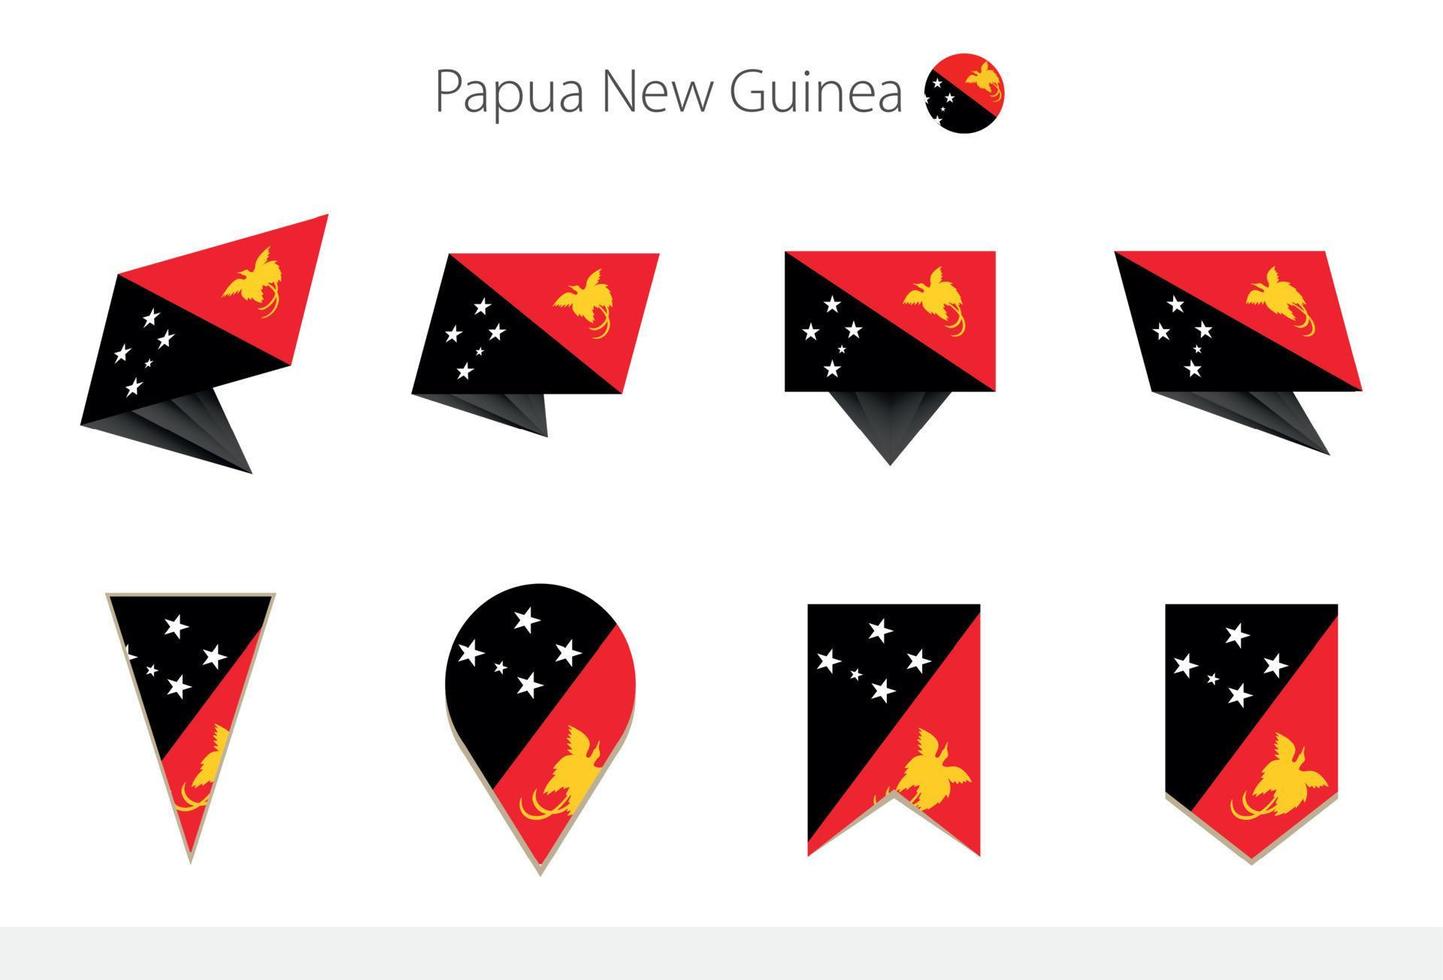 Papua New Guinea national flag collection, eight versions of Papua New Guinea vector flags.